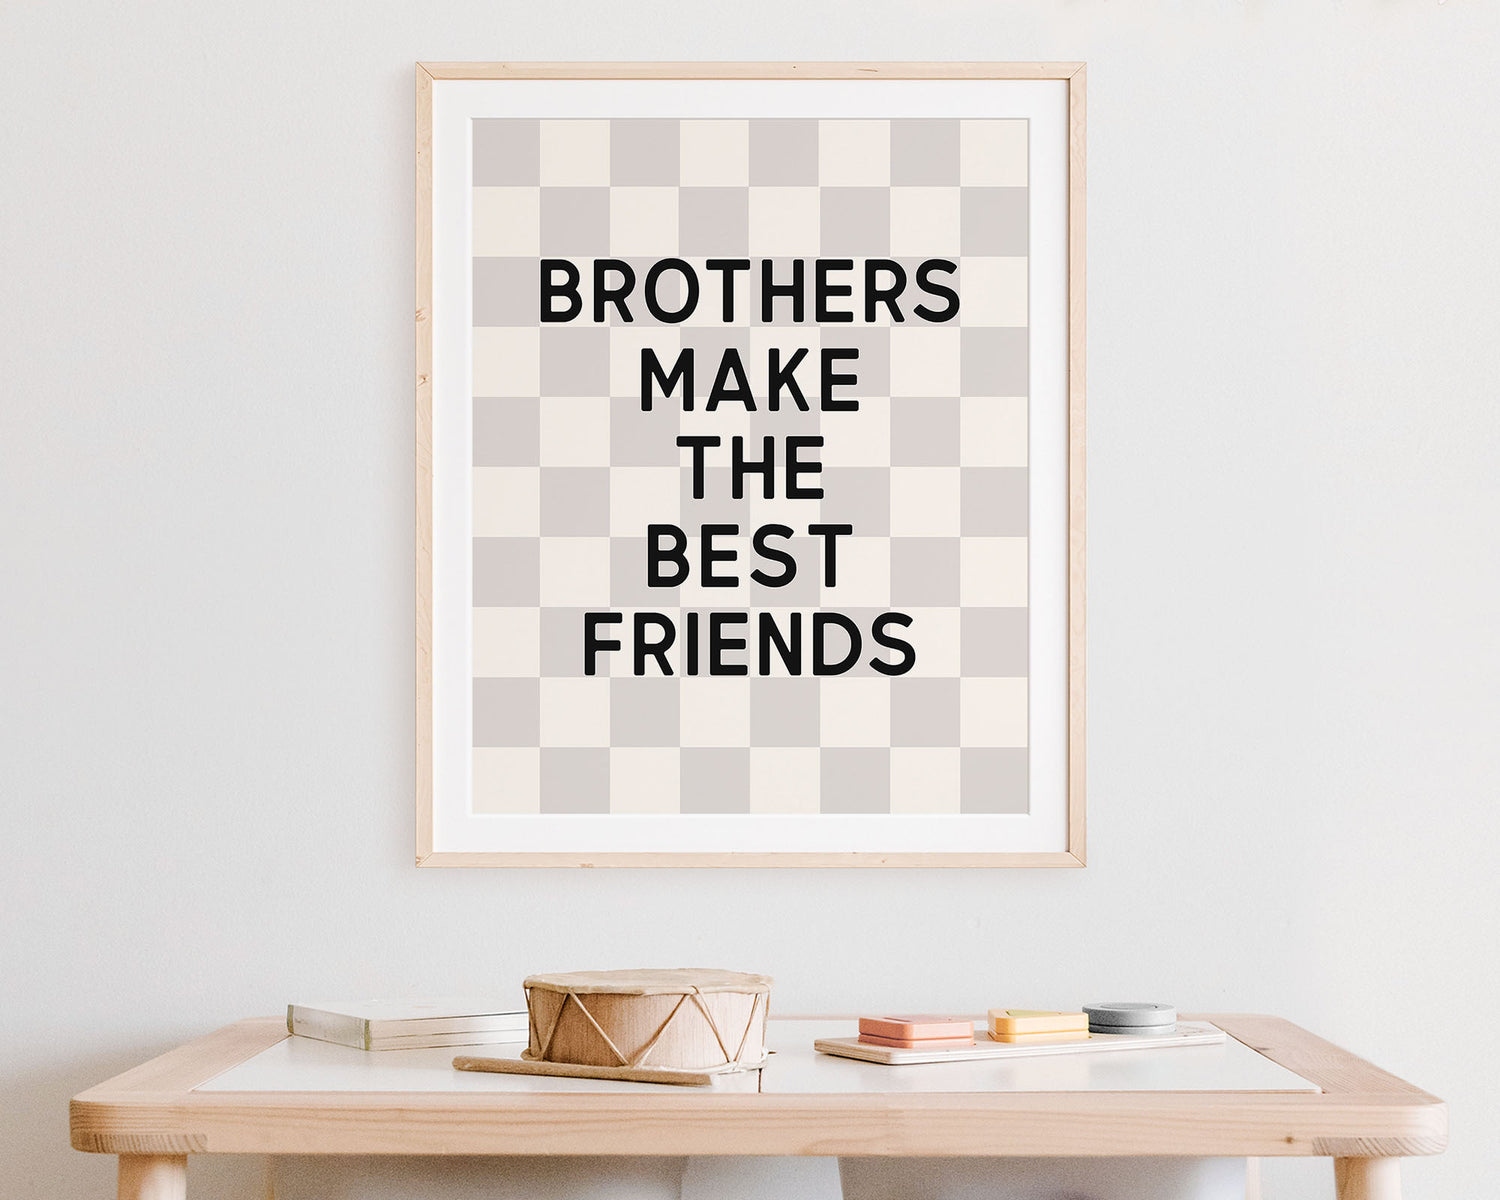 Brothers Make The Best Friends Instant Download Digital File featuring block lettering in black on a greige (pale gray / light beige) and off white checkered background. Perfect for Twin Baby Boys Nursery Decor, Toddler Boys Shared Bedroom Decor or Little Boys Playroom Wall Art.